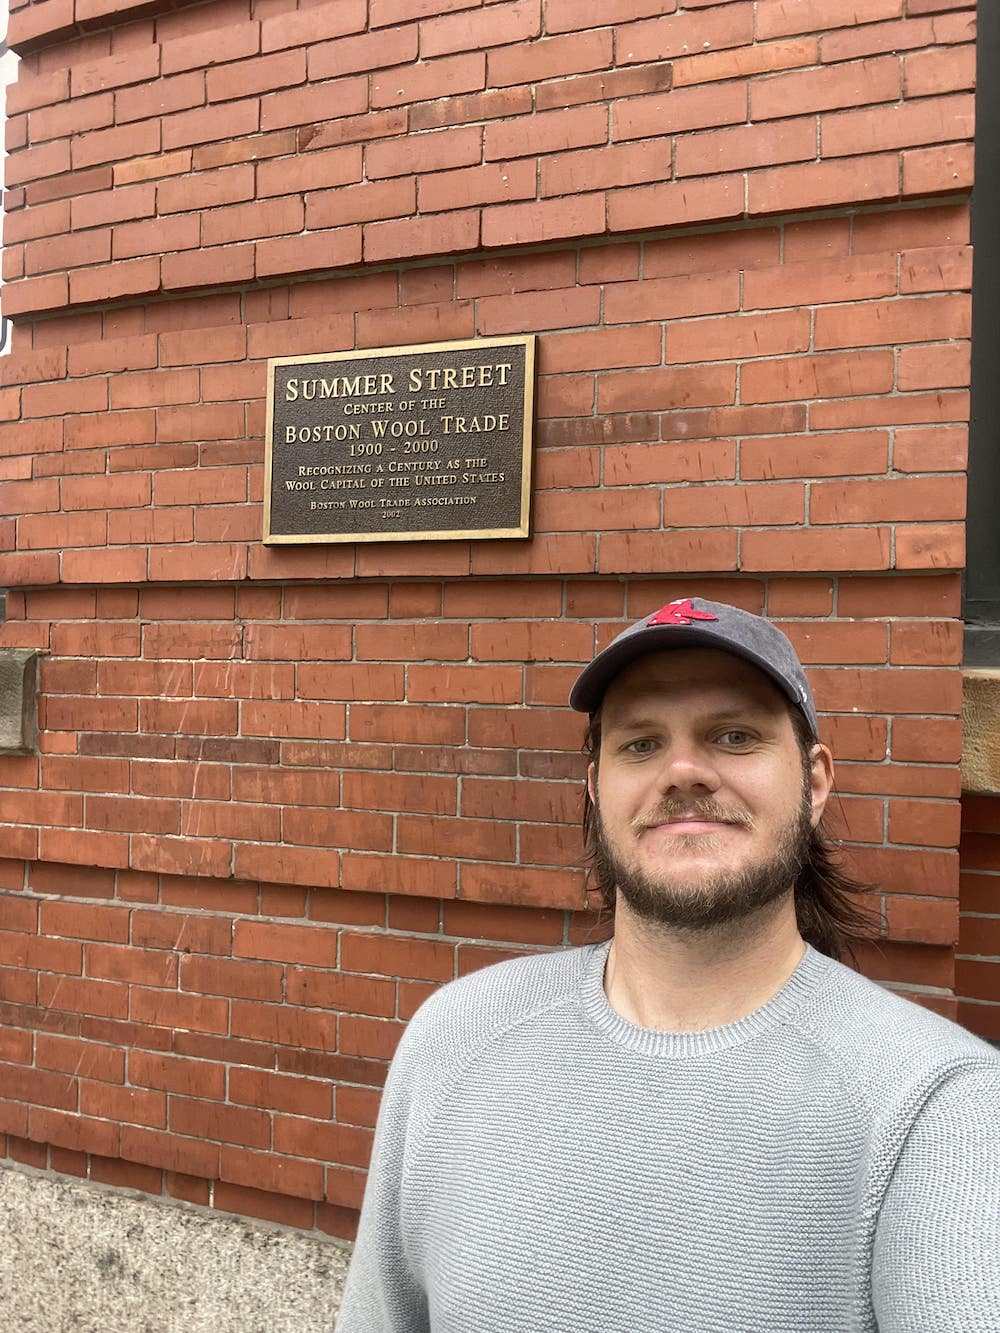 Slater_Wearing_US_Merino_Crew_Neck_Standing_in_Front_of_The_Plaque_Commemorating_the_Boston_Wool_Trade_-_Oliver_Charles.jpg__PID:2d00c9d4-8e72-4992-b6f0-088212e604c2